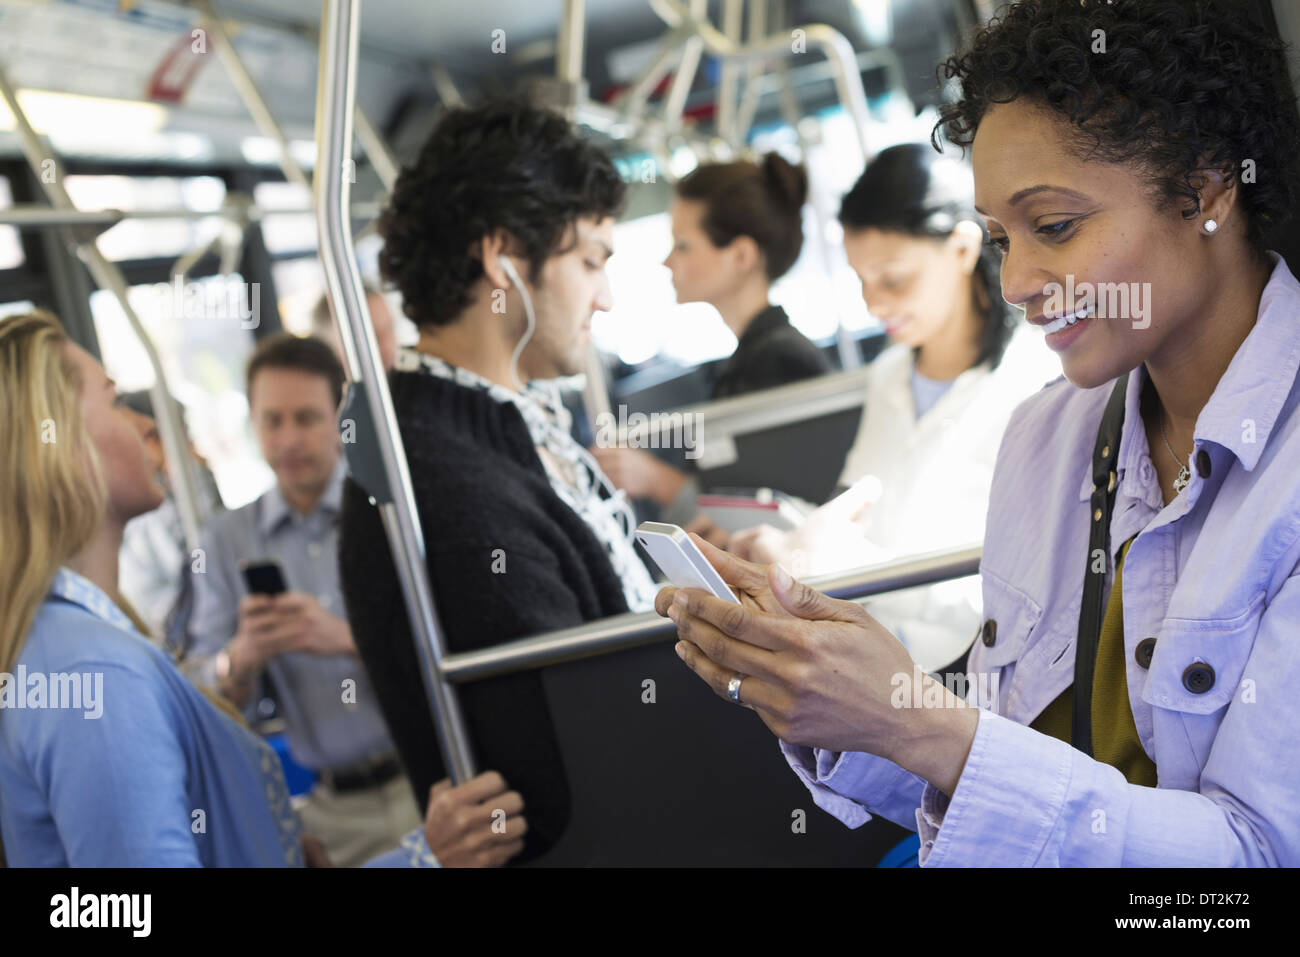 New York City men and women city bus Public transport Keeping in touch A young woman checking or using her cell phone Stock Photo